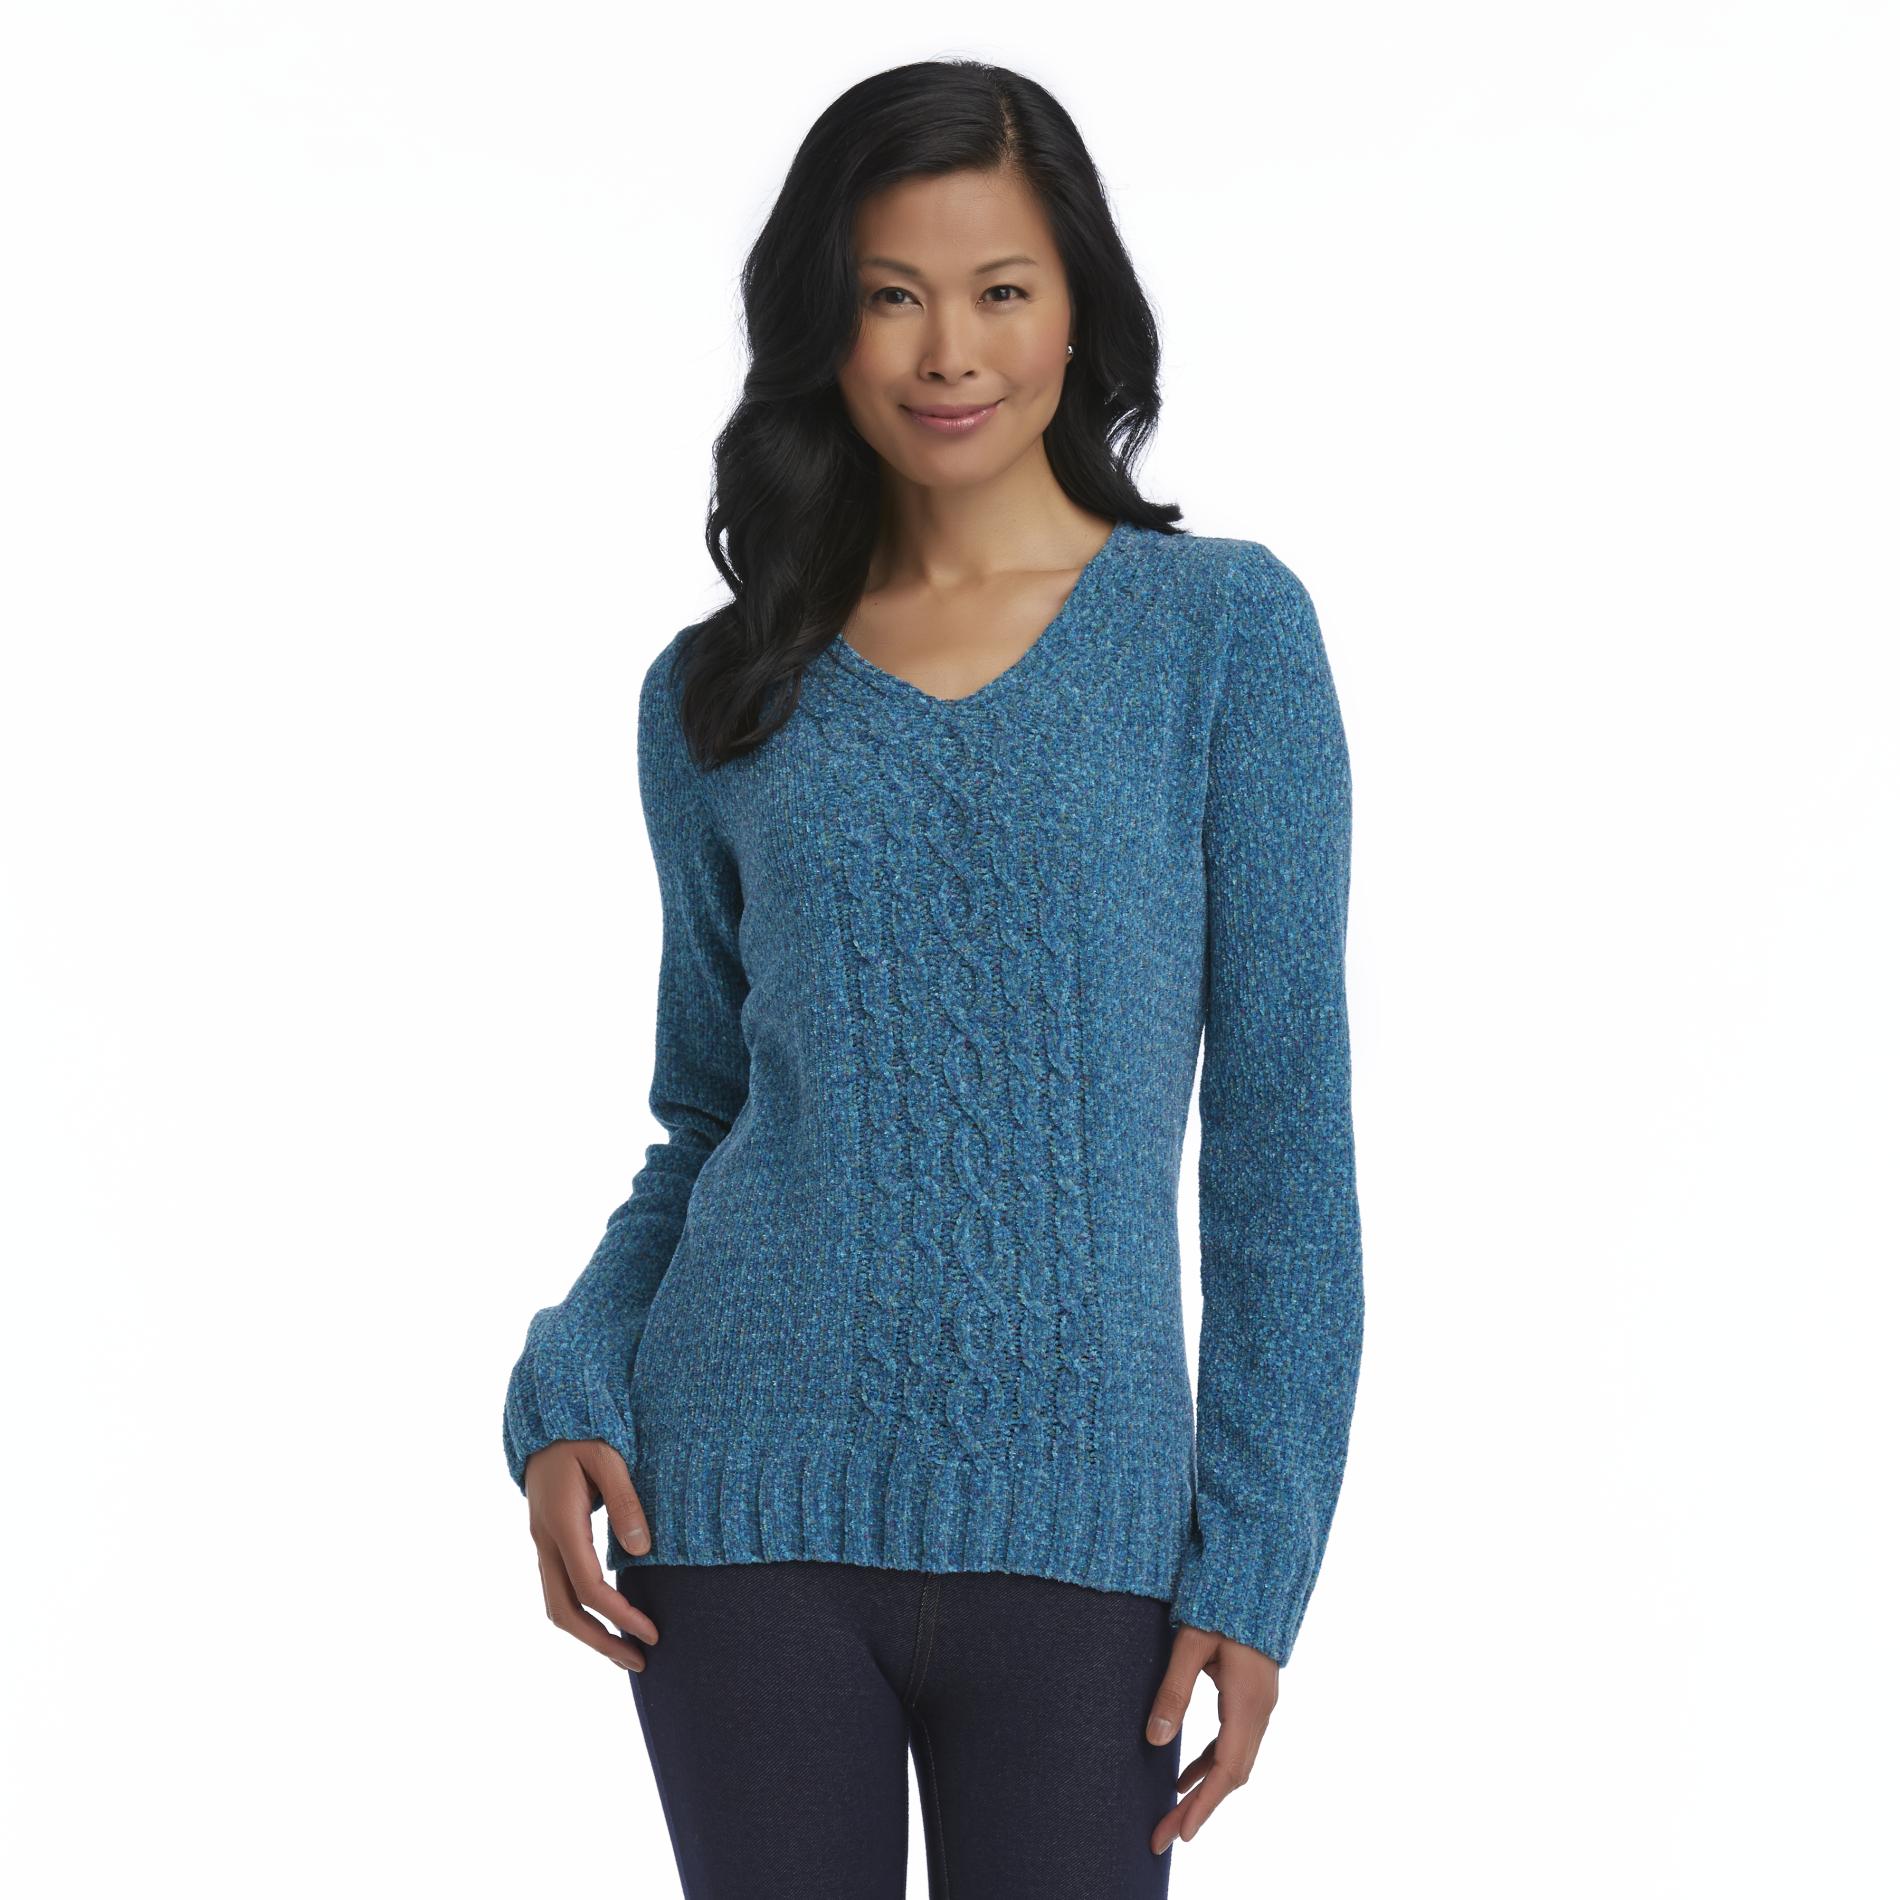 Basic Editions Women's Cable Knit Chenille Sweater